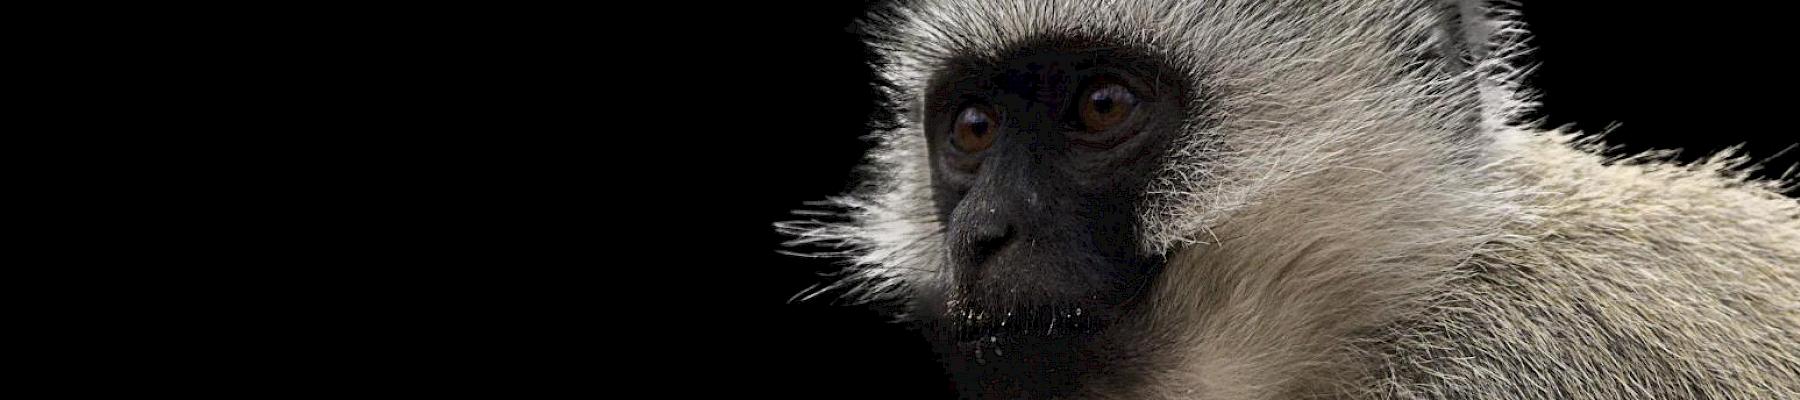 Vervet monkeys were one of the most common CITES-listed species found for sale